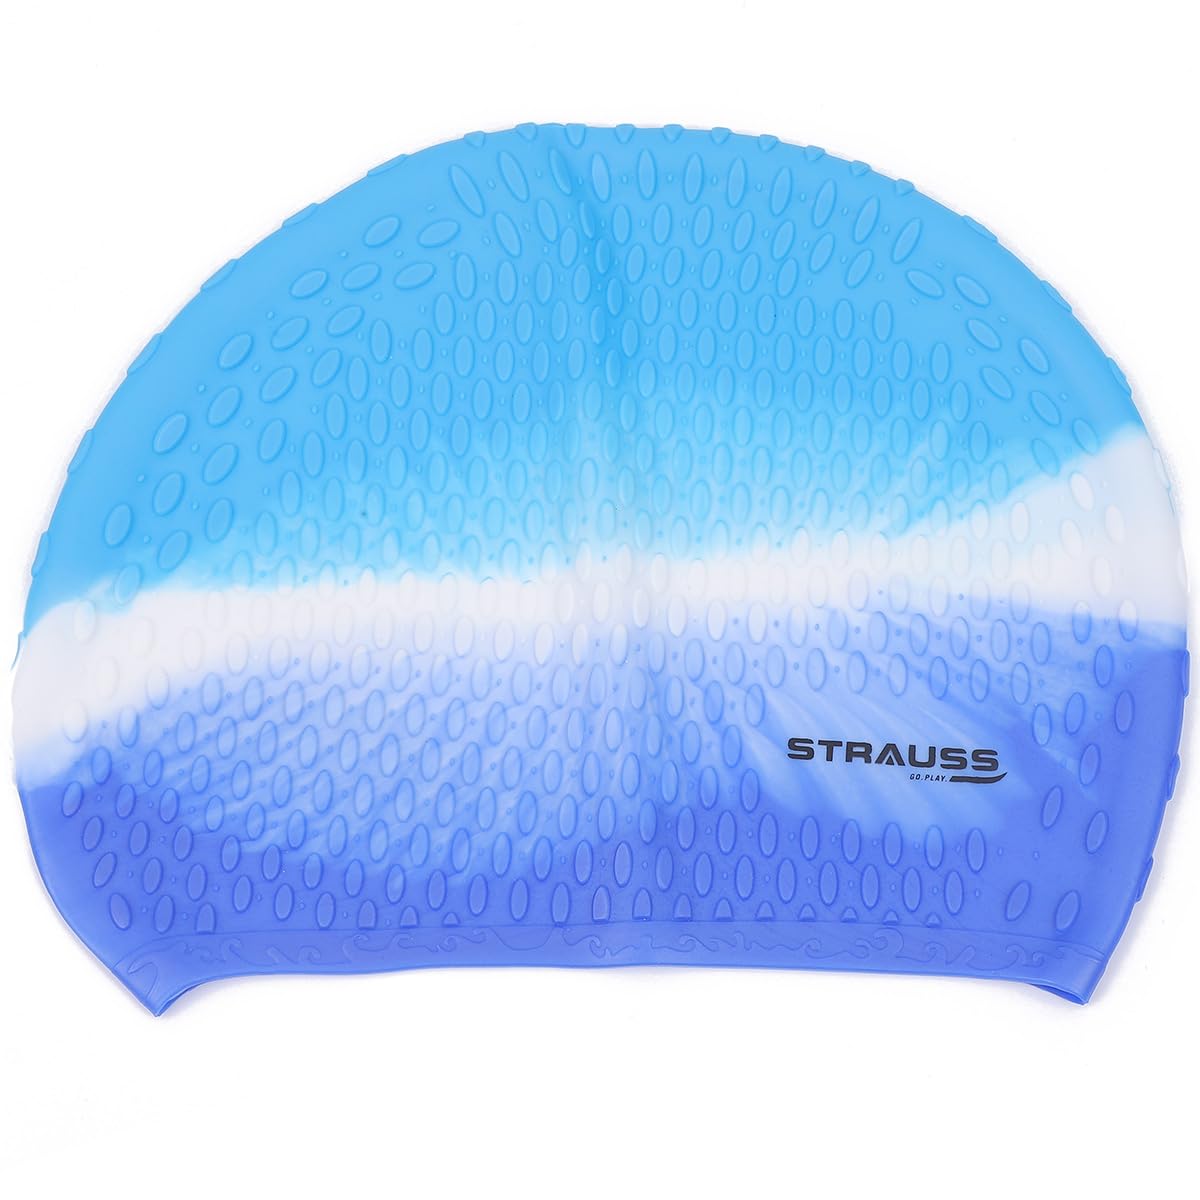 Strauss Latest Designed Swimming Cap |Keeps Hair Clean with Ear Protector|Suitable for Long and Short Hair|Swimming Head Cap with Breathable Fabric|Waterproof Swim Cap for Adult, Woman and Men,(Blue)